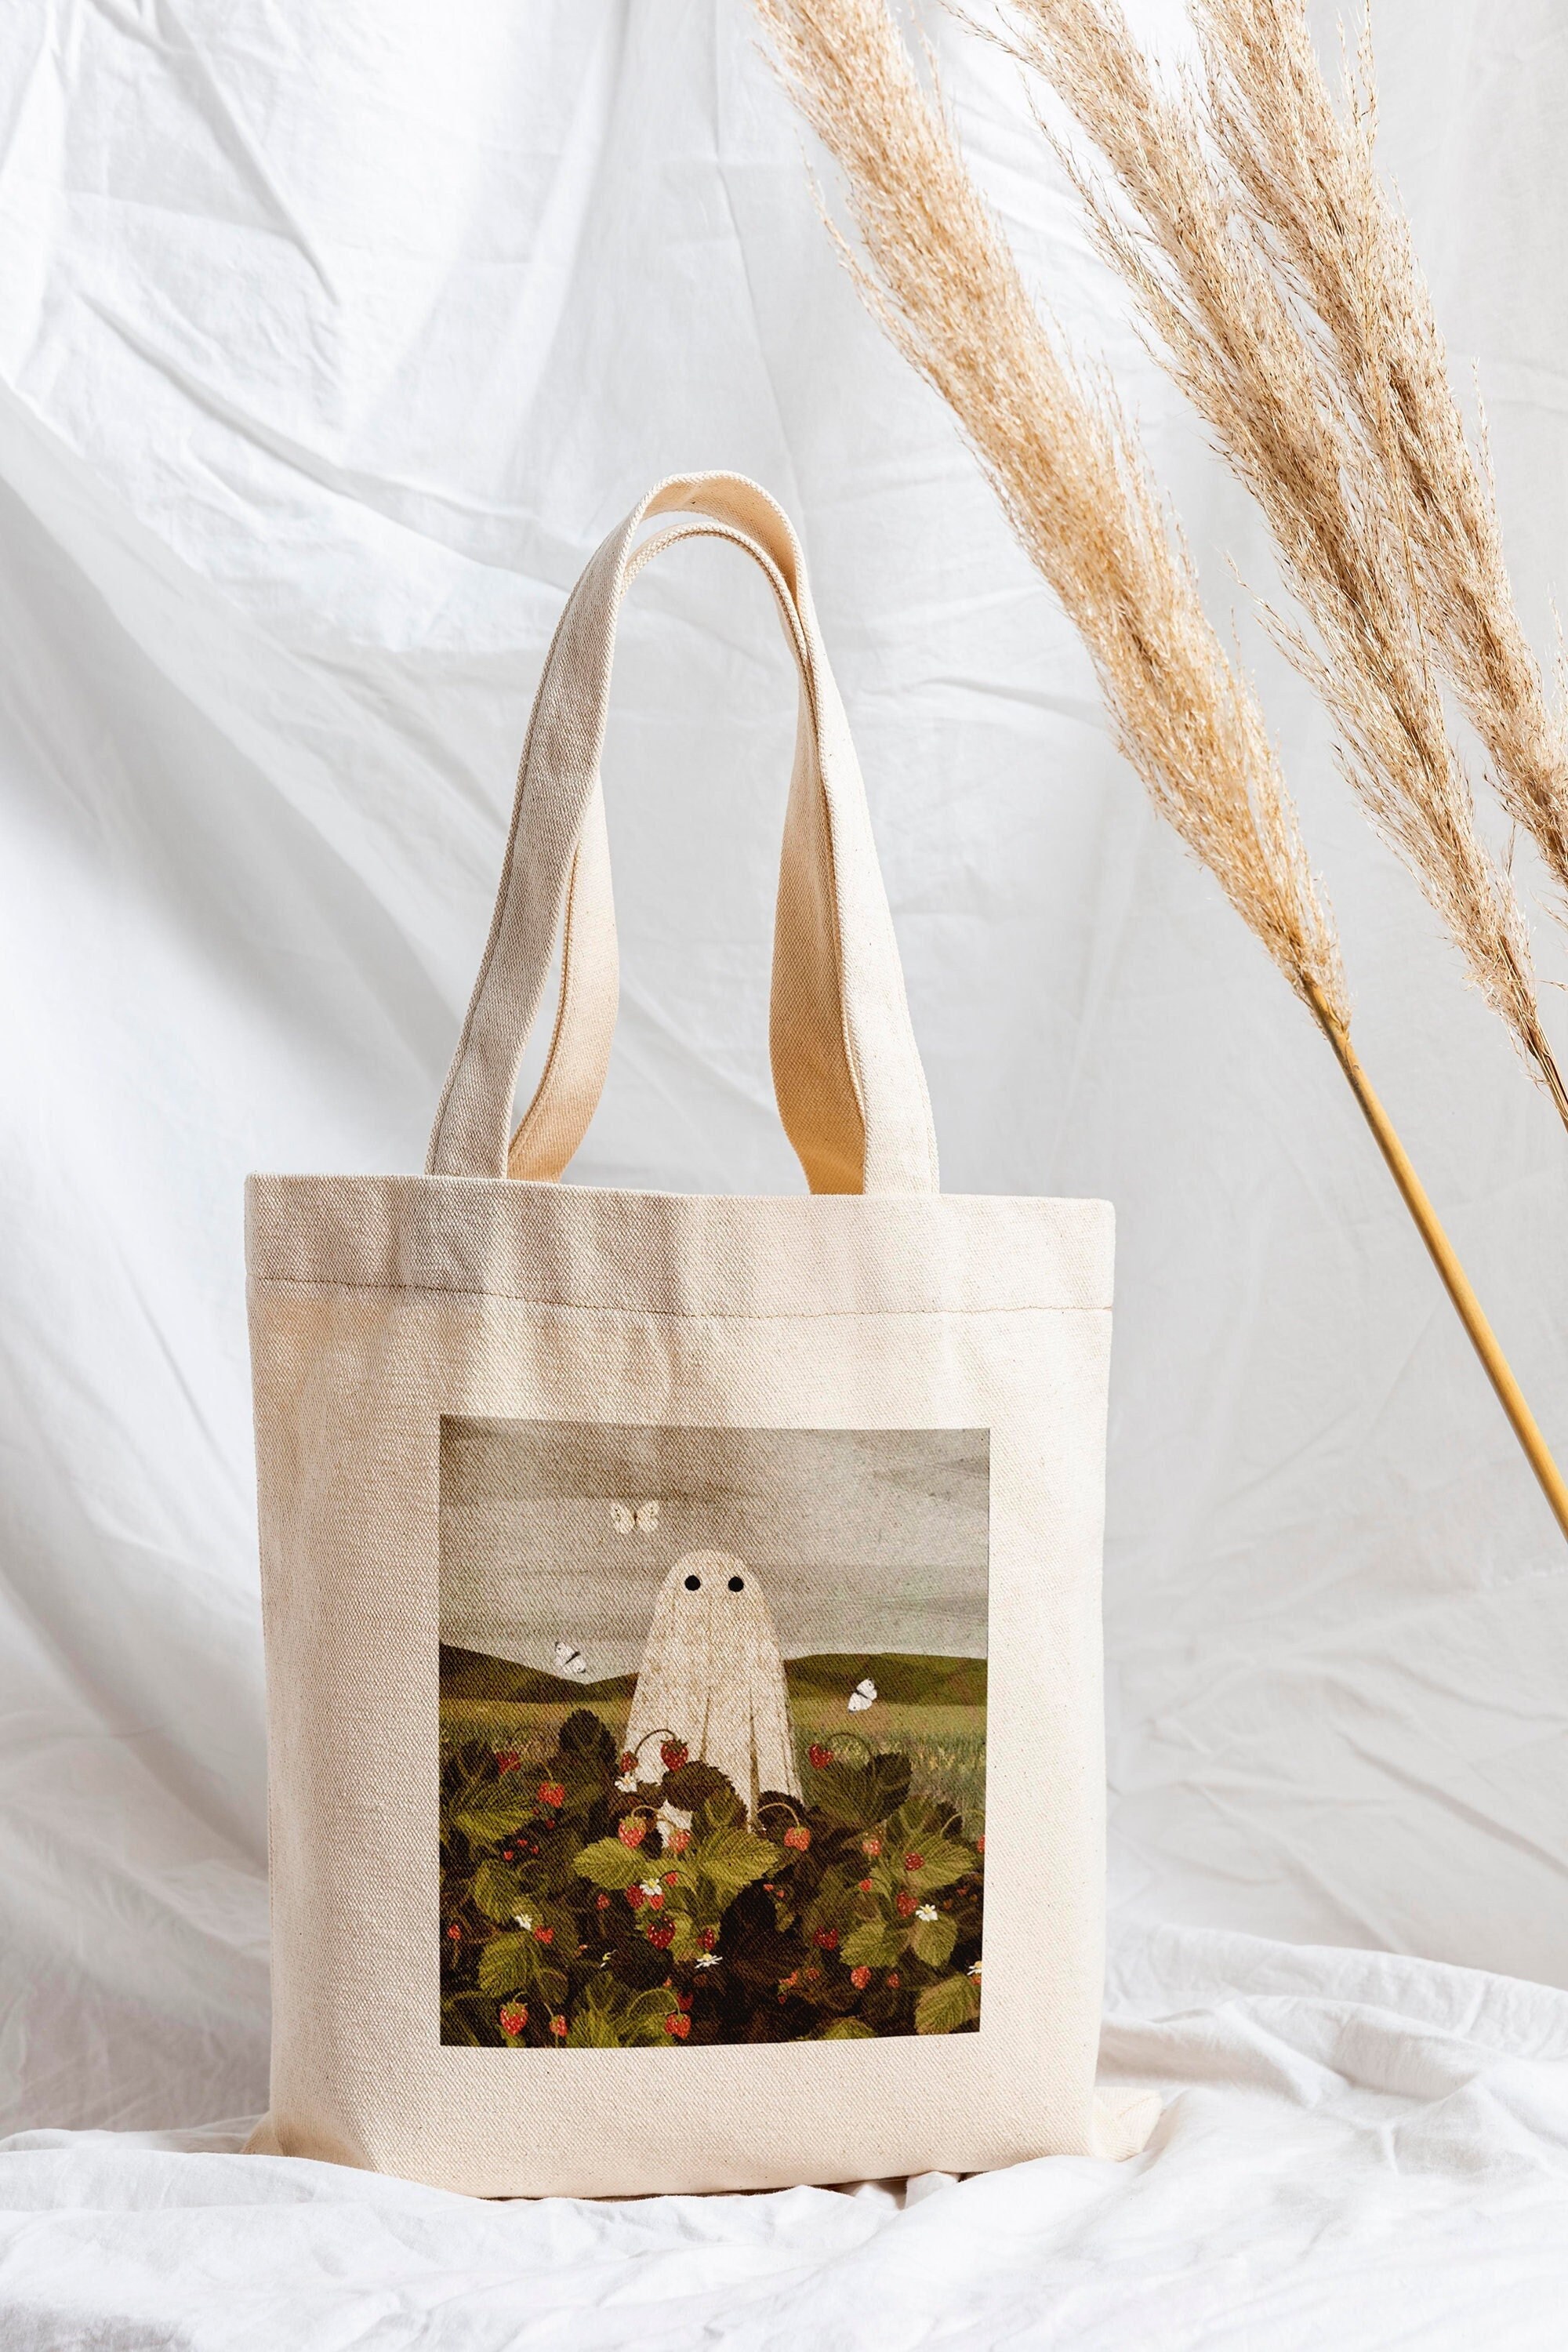 Discover Strawberry Tote Bag, Fields Tote Bag, Canvas Tote Bag